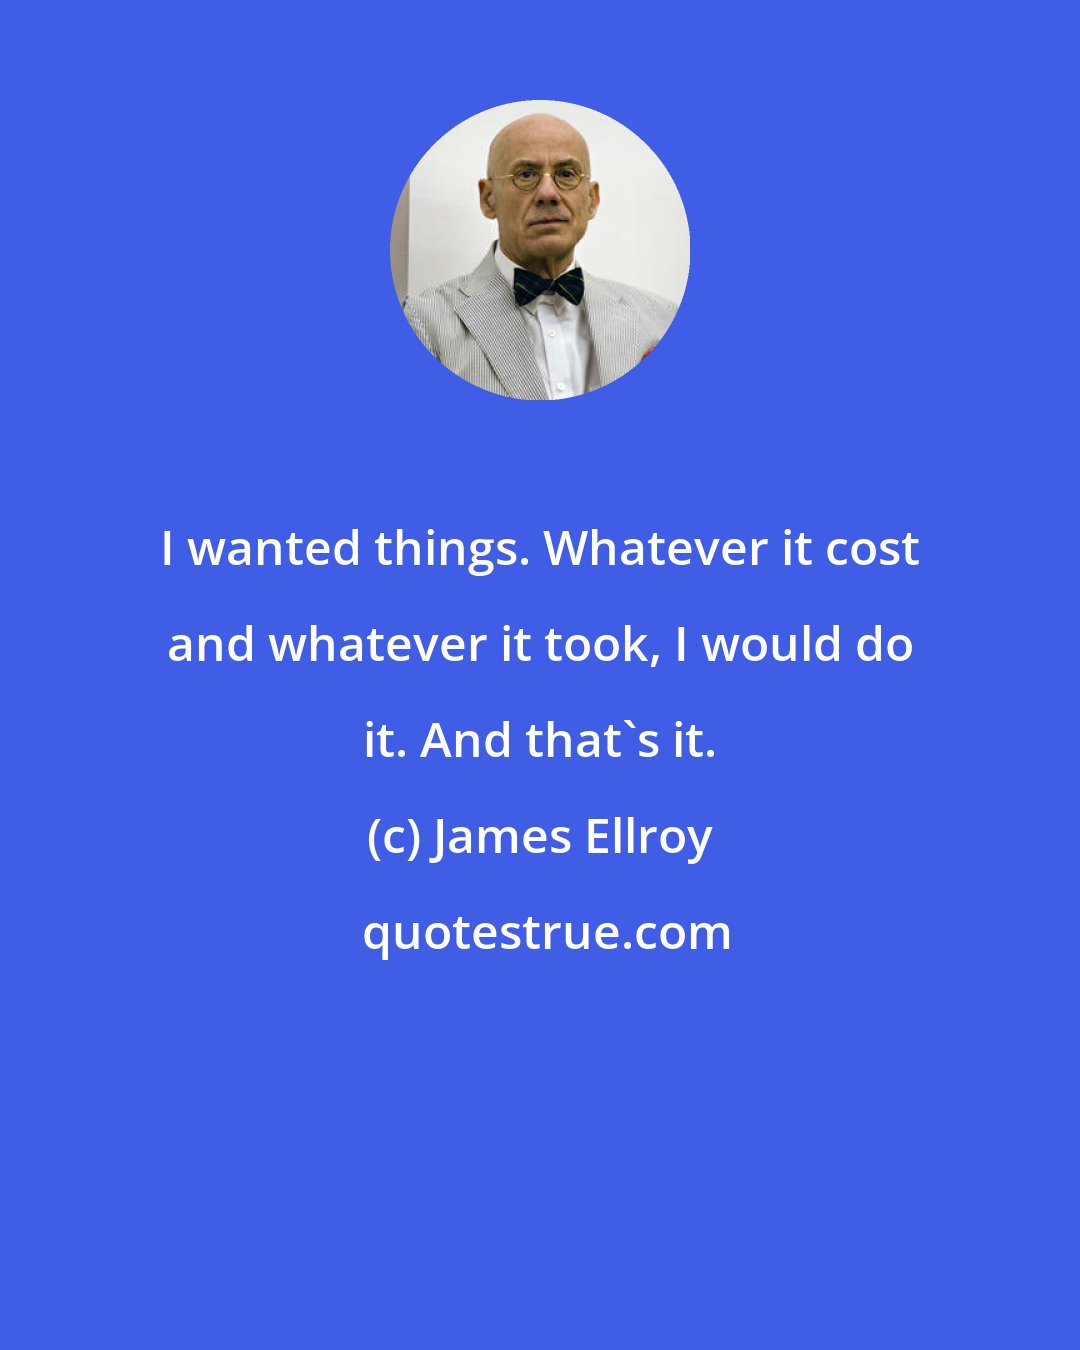 James Ellroy: I wanted things. Whatever it cost and whatever it took, I would do it. And that's it.